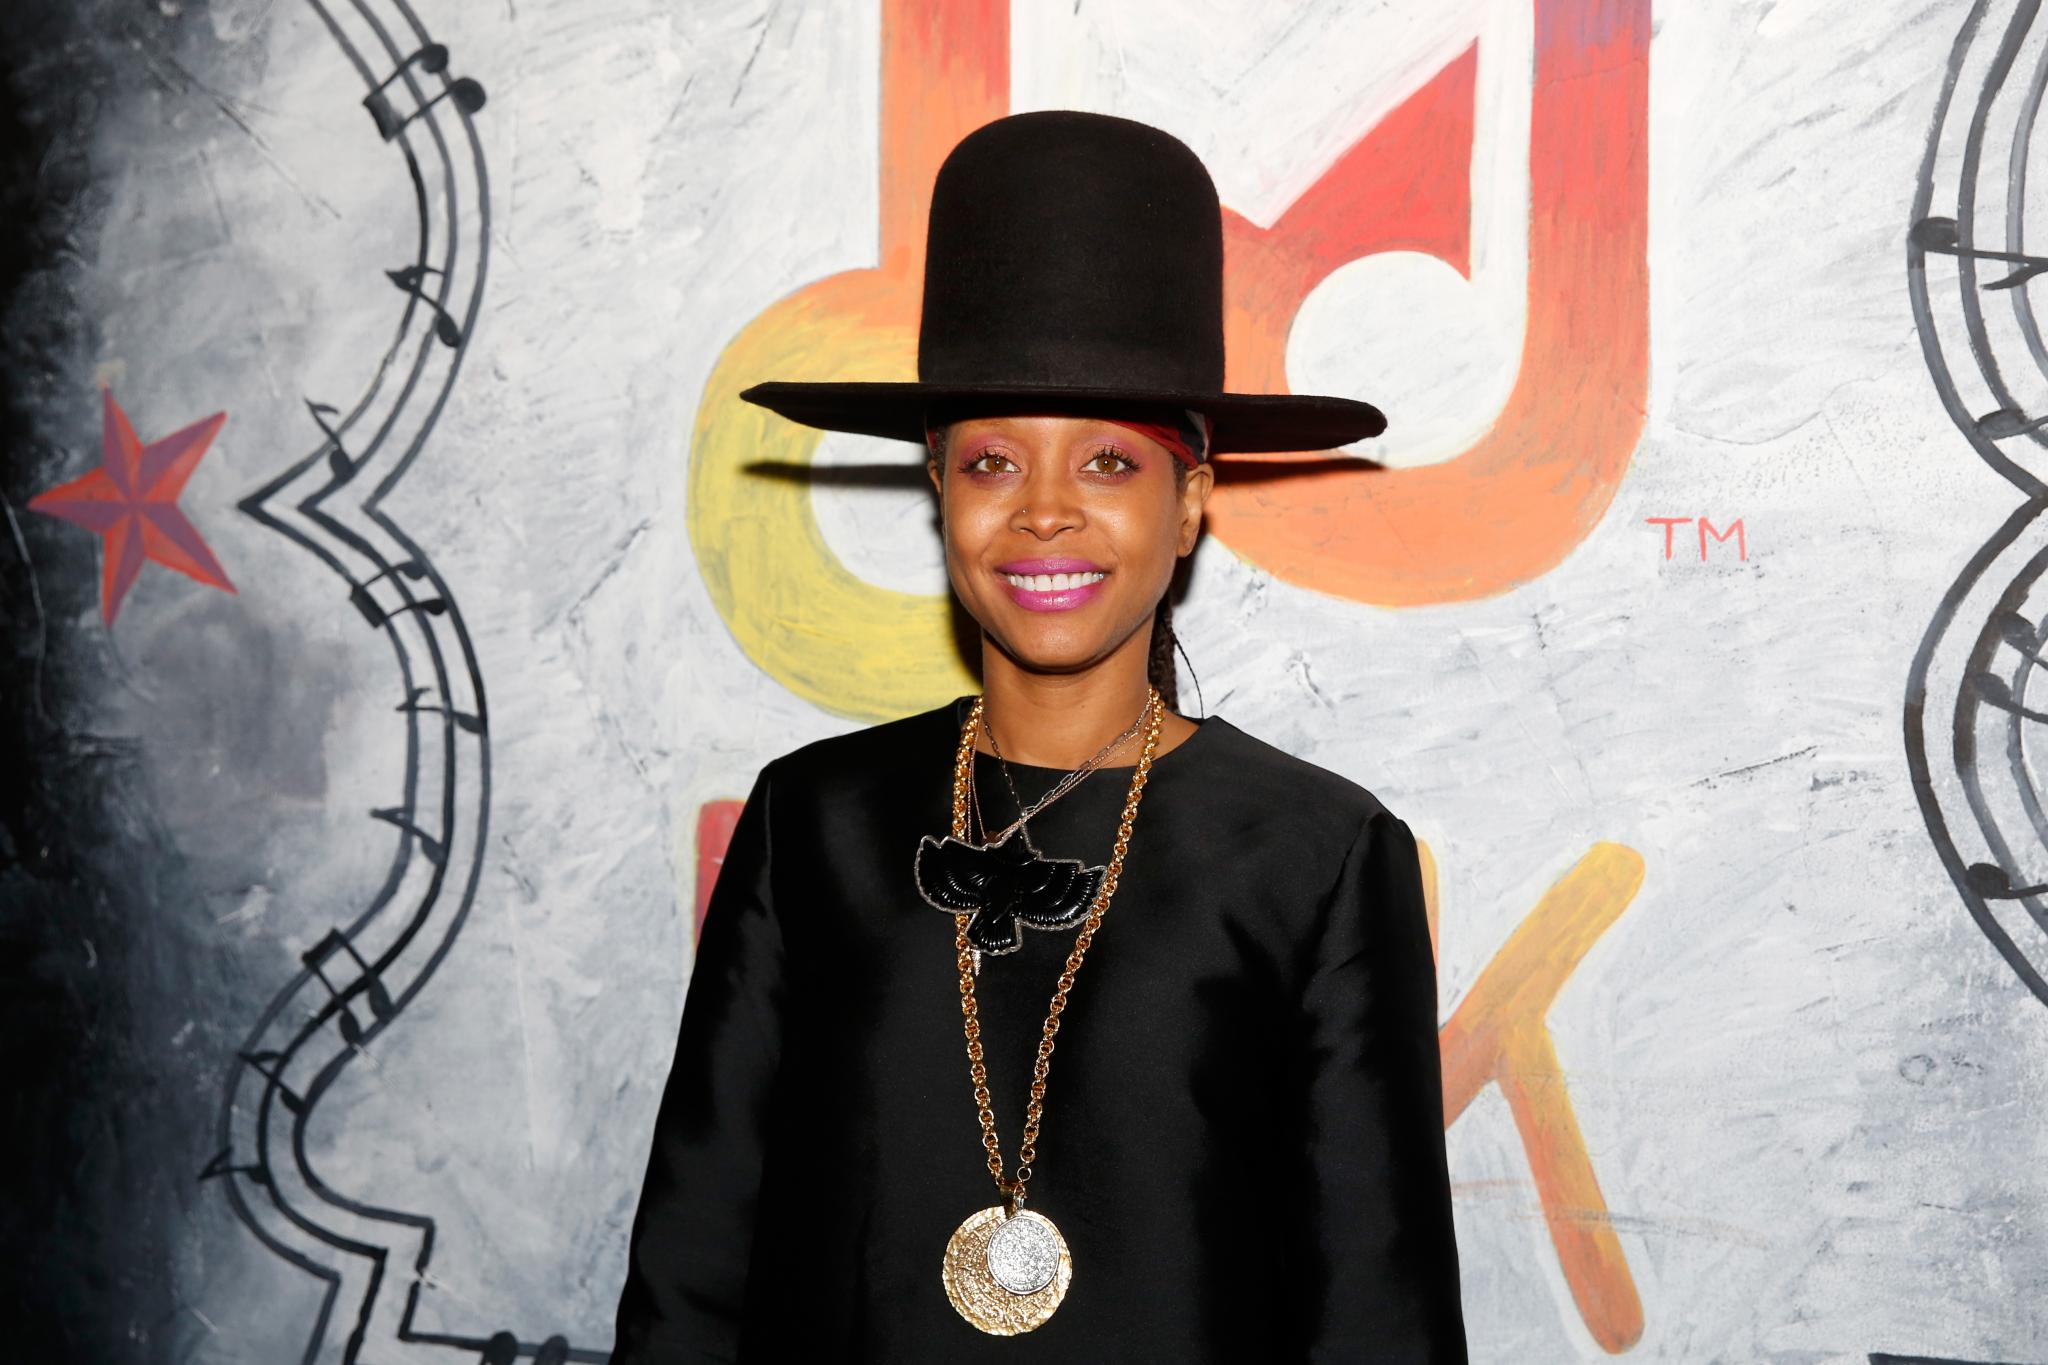 7 Love Lessons Learned from Erykah Badu’s "New Amerykah Part Two"